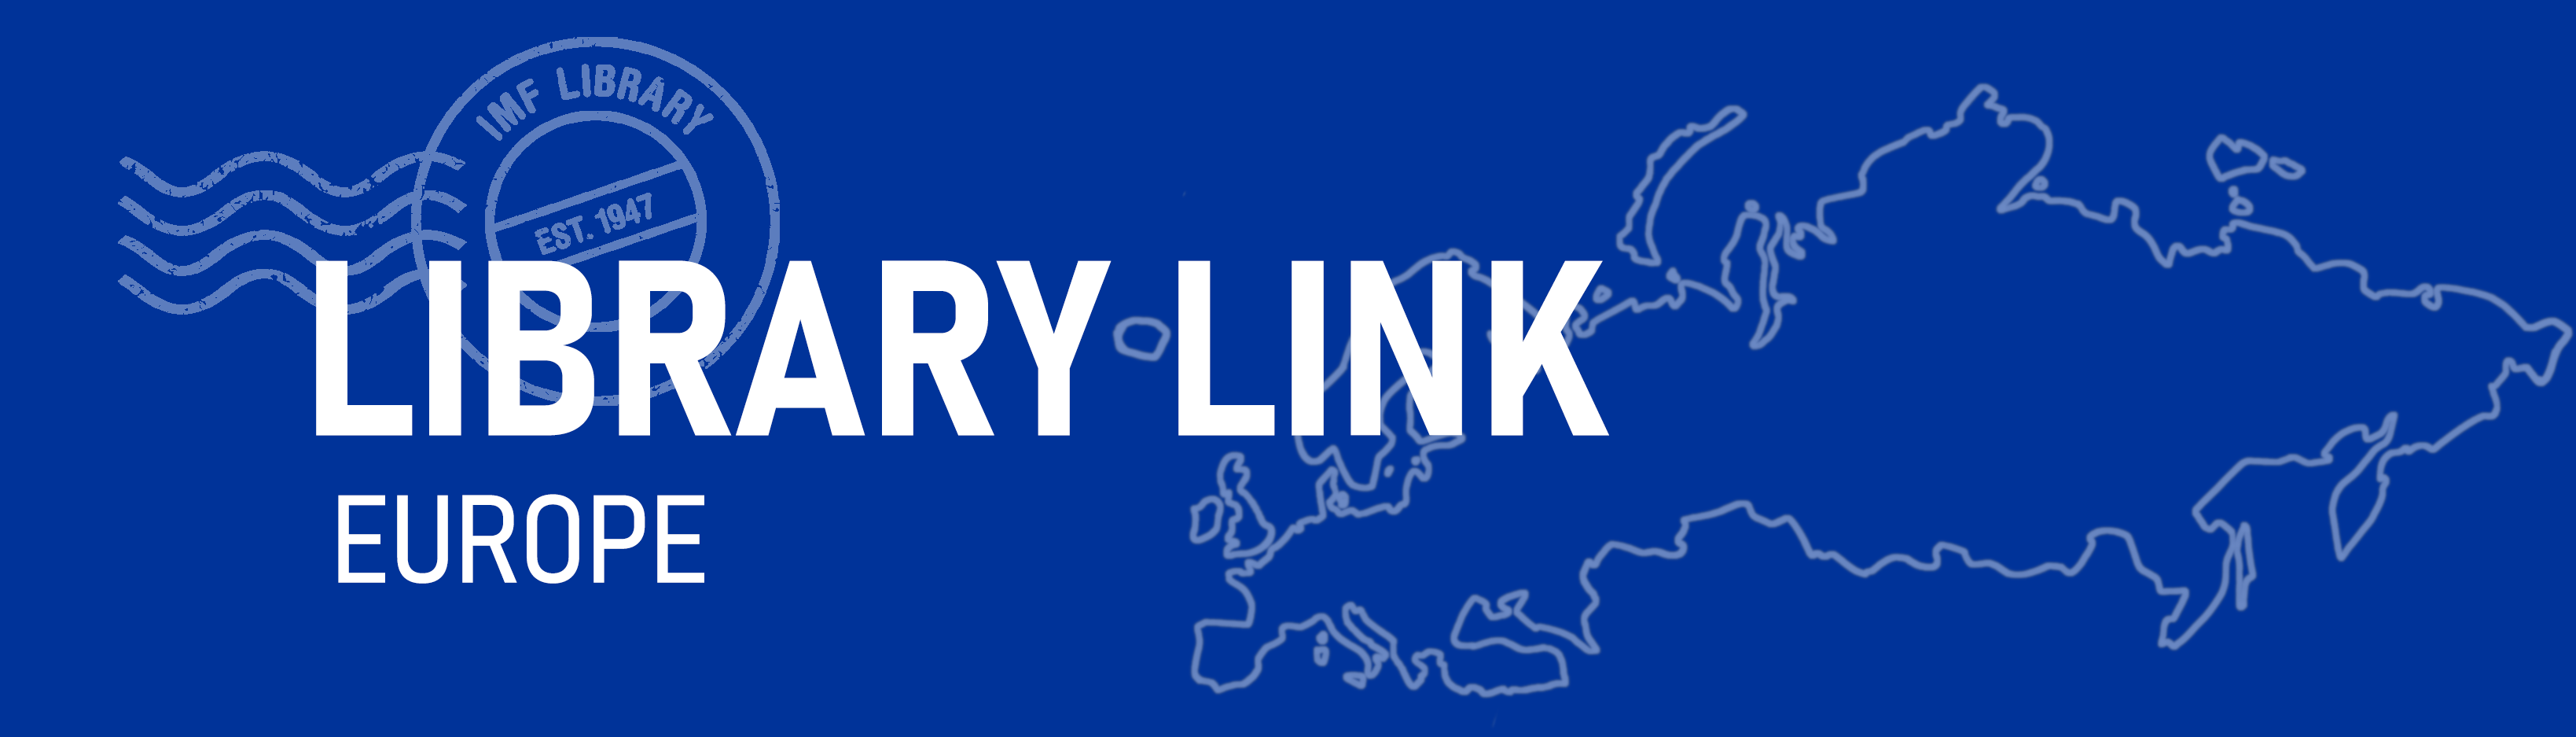 Library Link: Europe newsletter